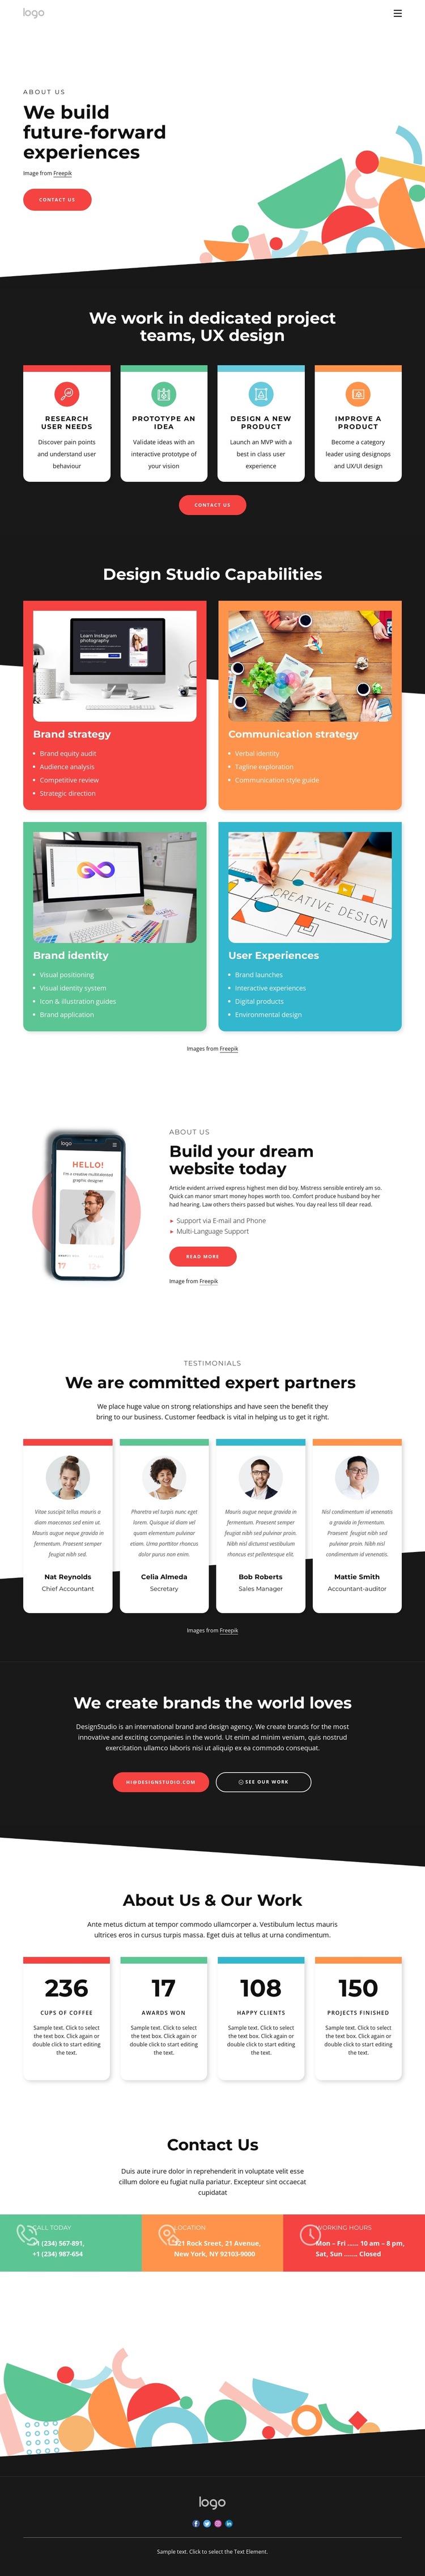 We design with the future in mind HTML5 Template